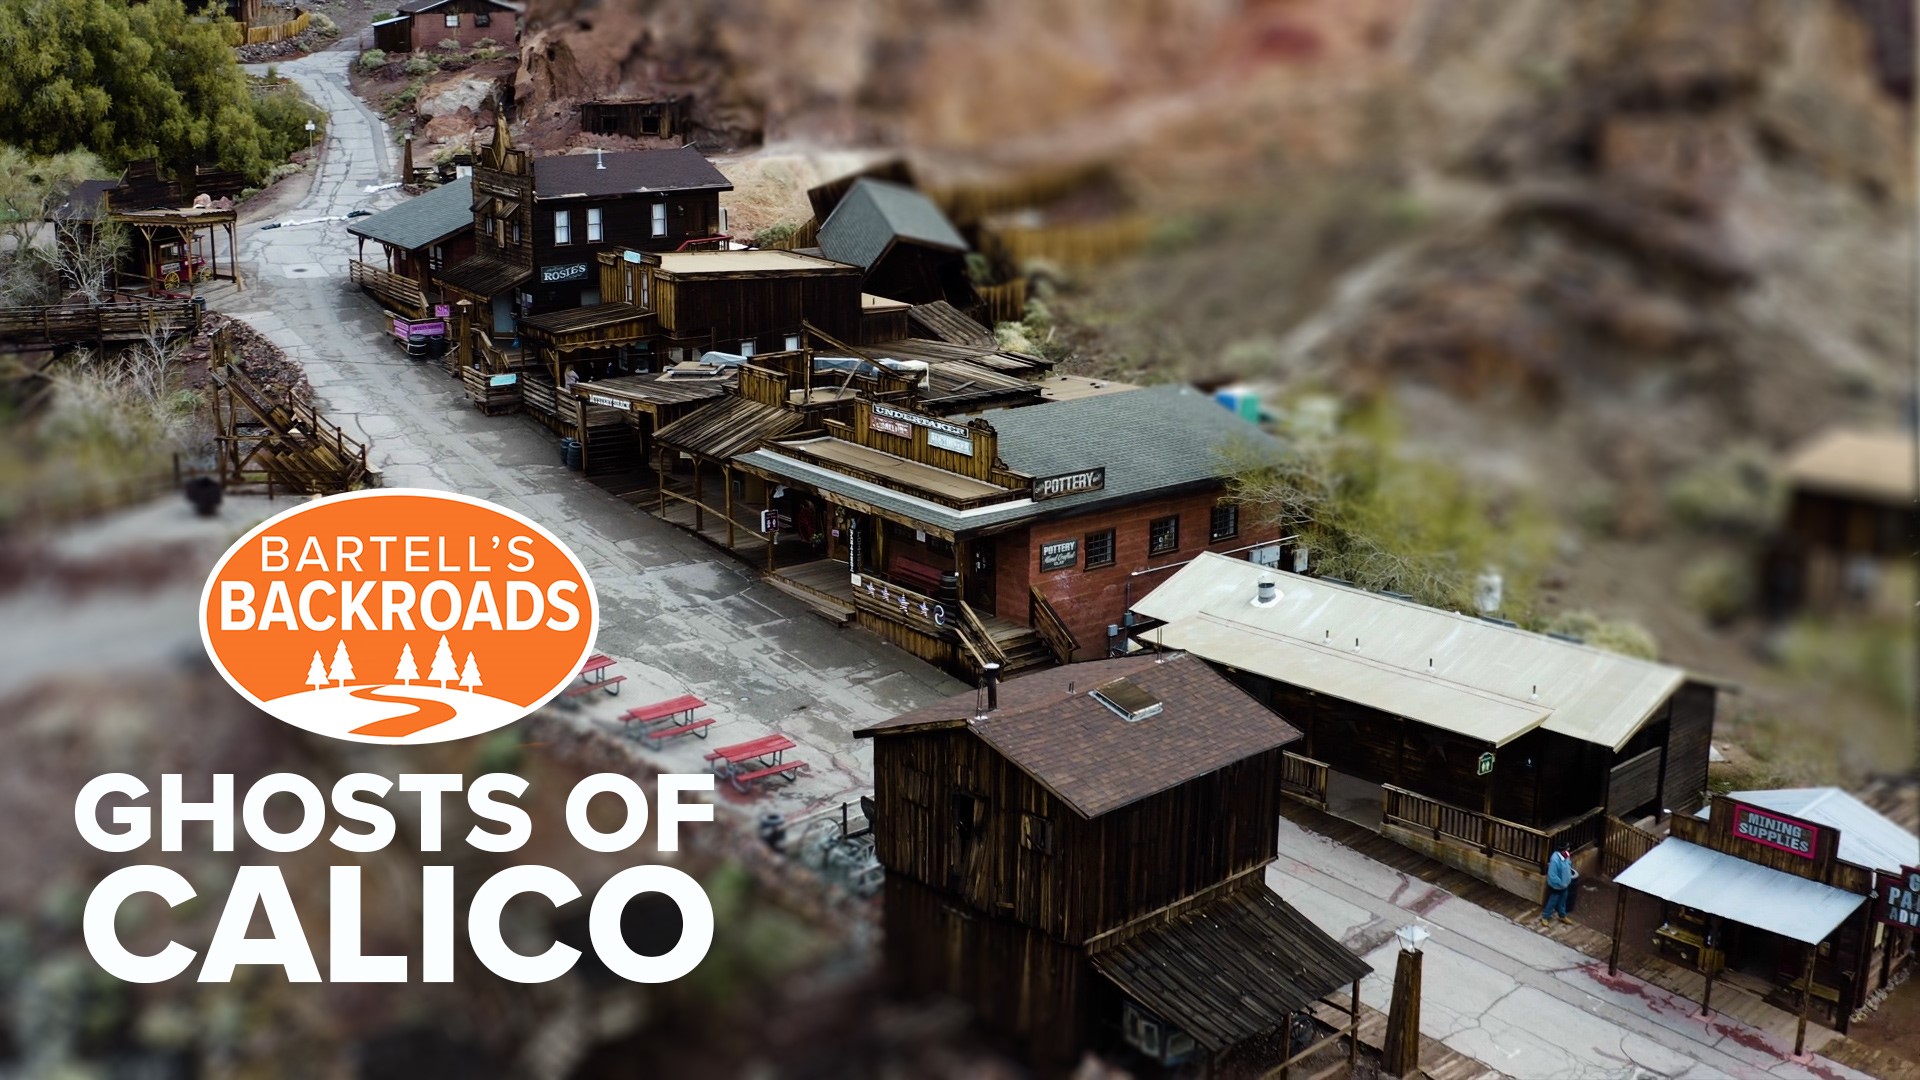 Calico was once a mining destination in California, then a ghost town. Now, it's an amusement attraction showcasing its history. Recorded pre-coronavirus.